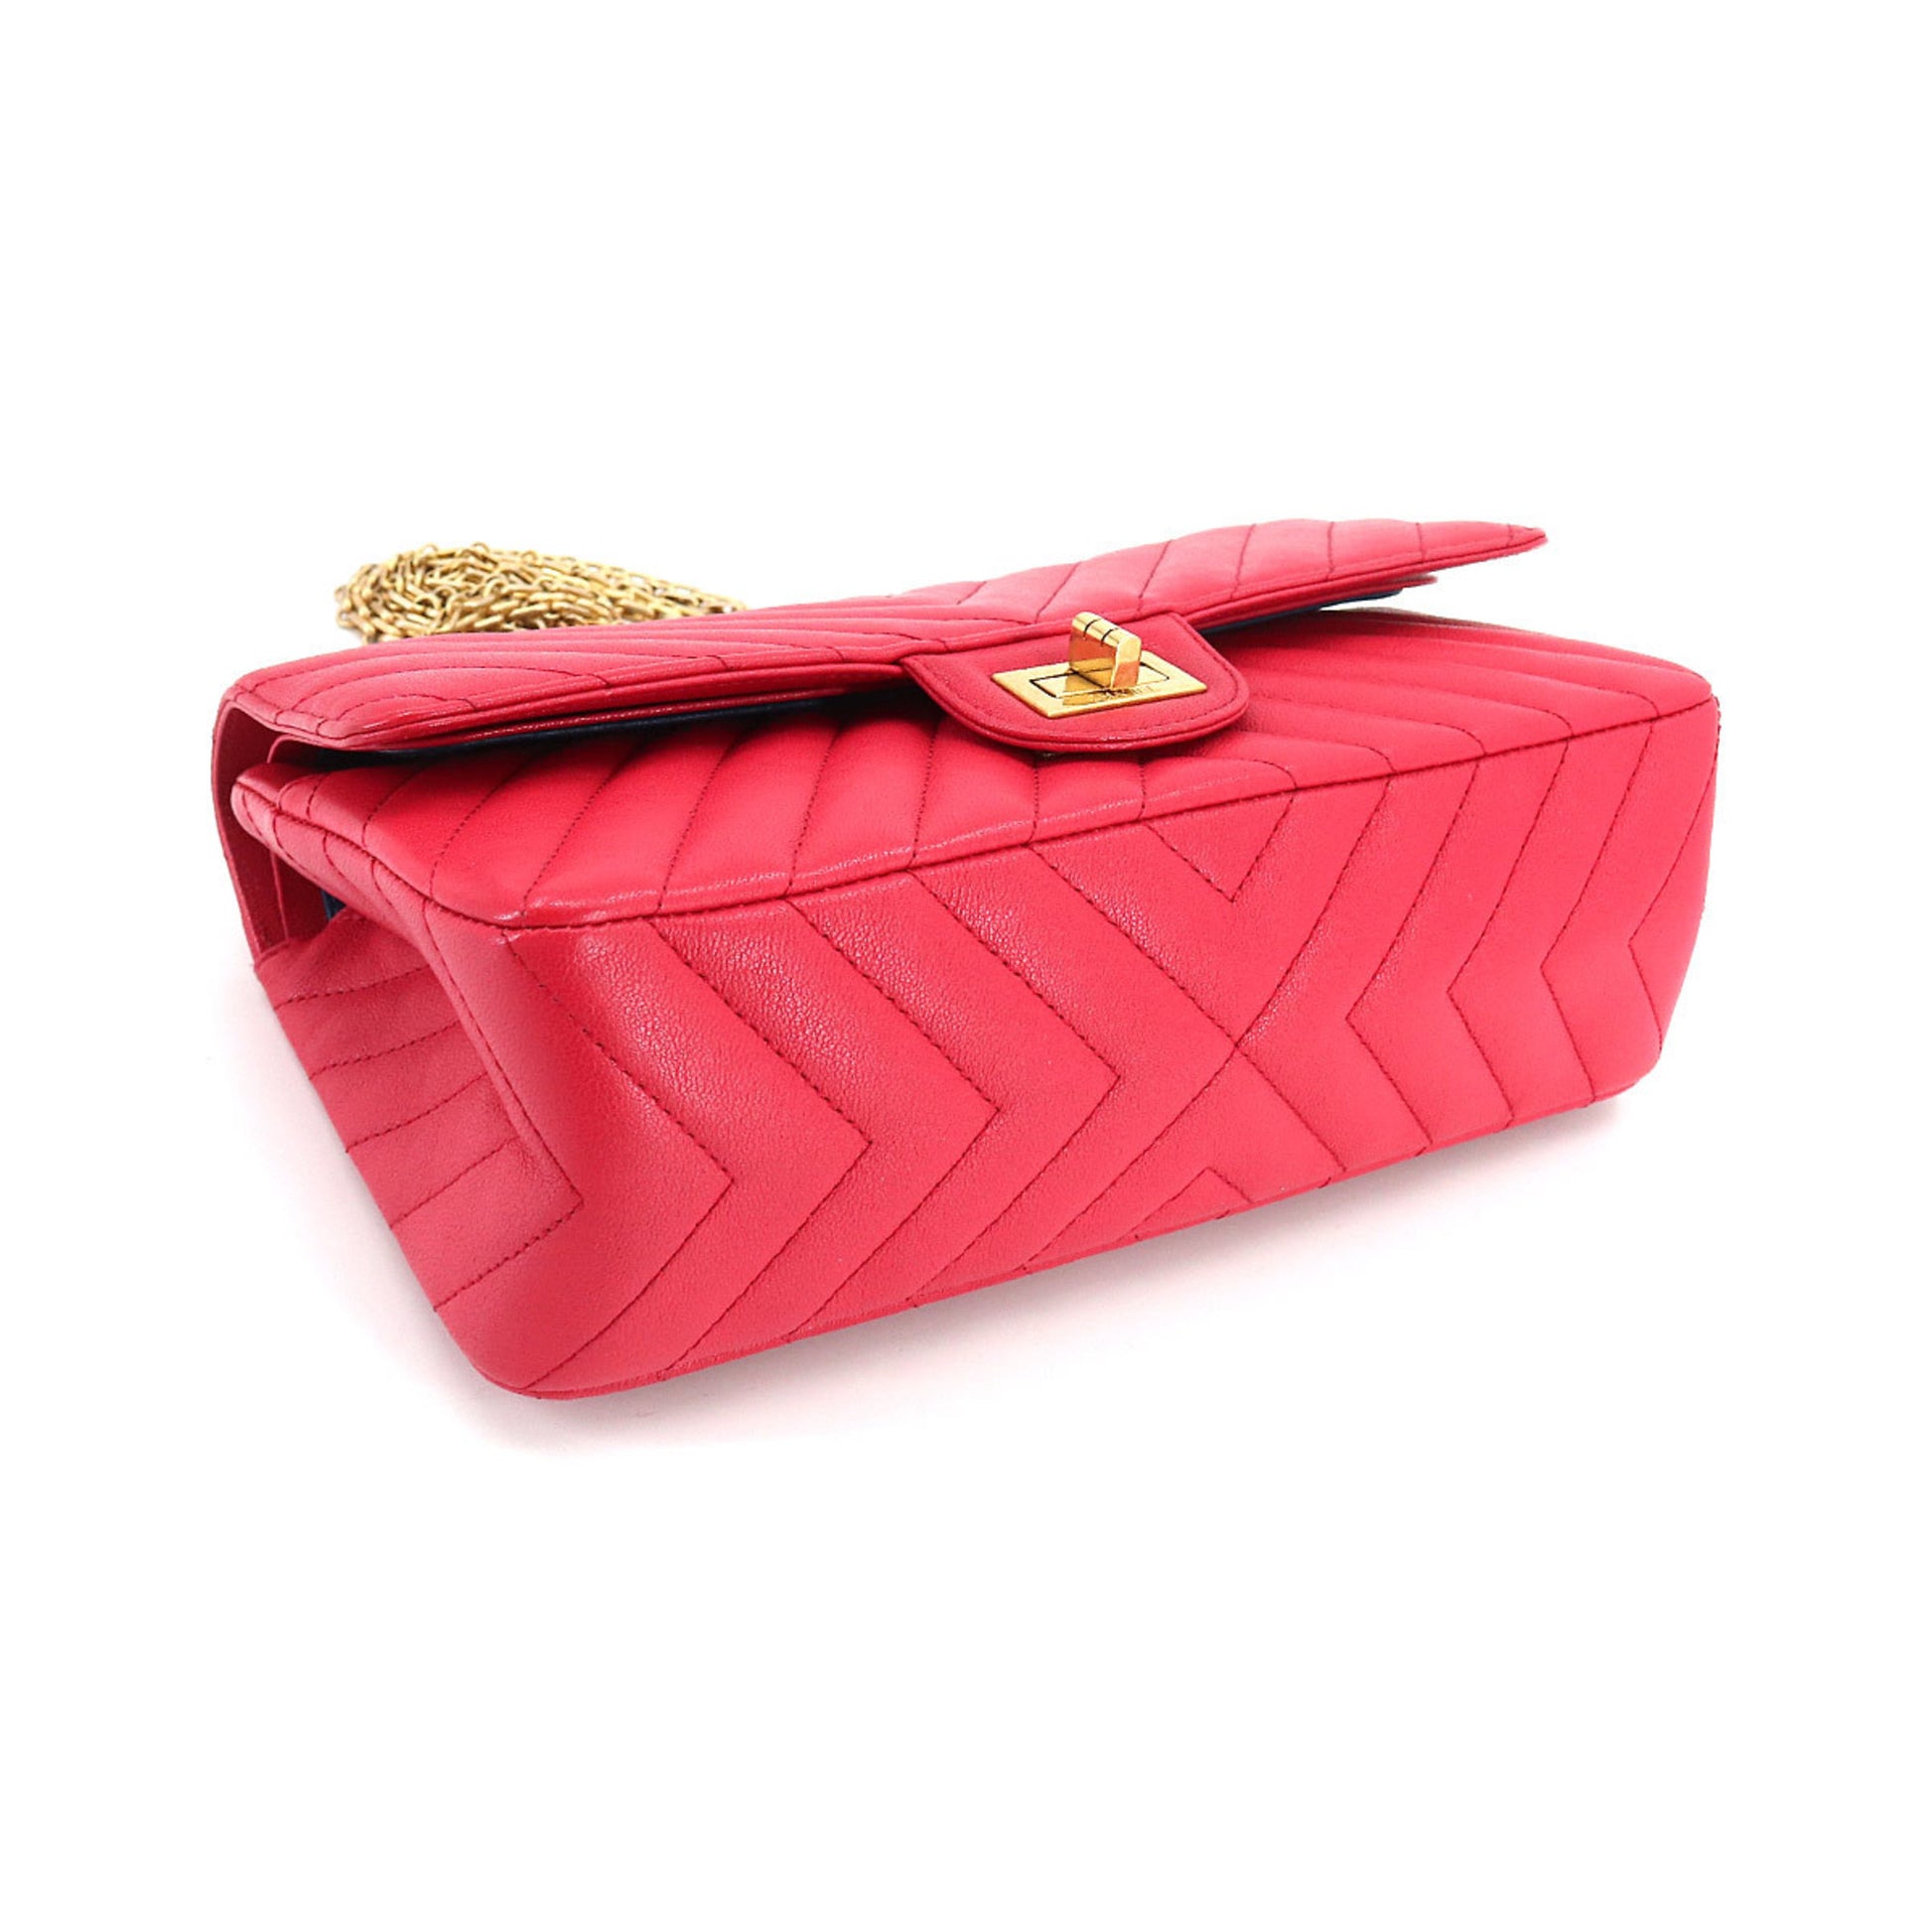 Chanel CHANEL 2.55 Chevron V stitch chain shoulder bag leather red A37586  gold metal fittings Bag